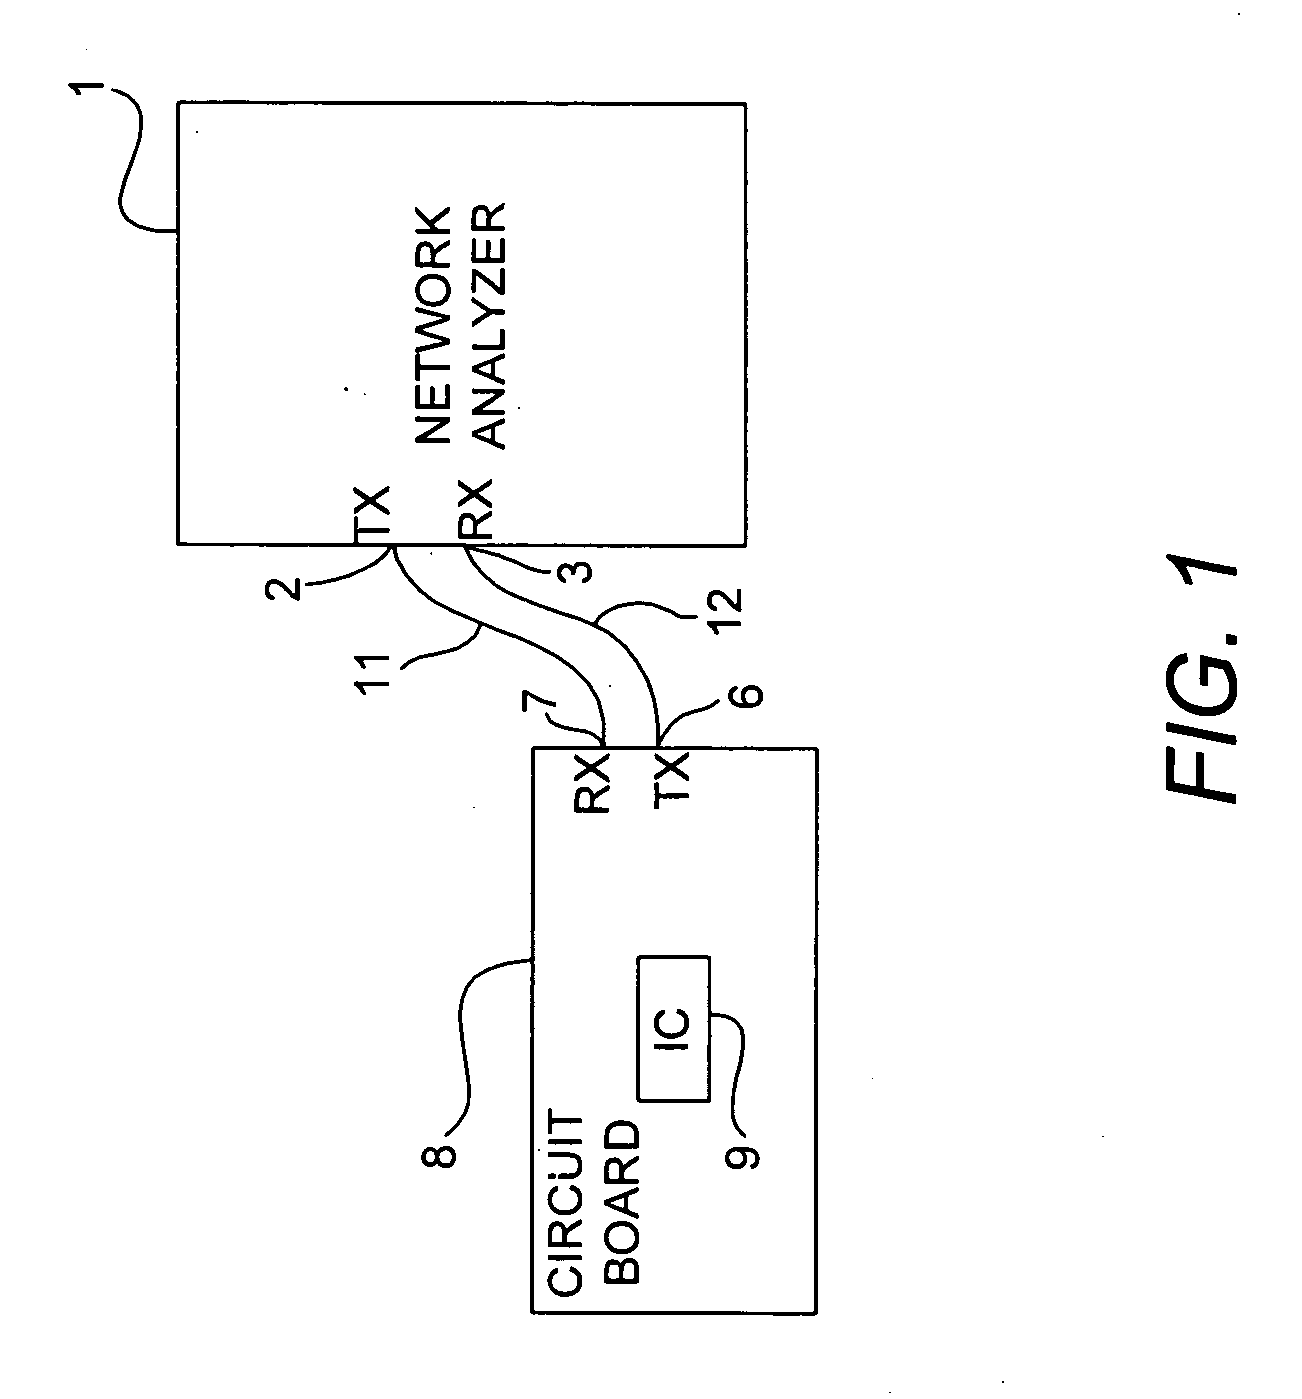 Method and apparatus for determining one or more s-parameters associated with a device under test (DUT)